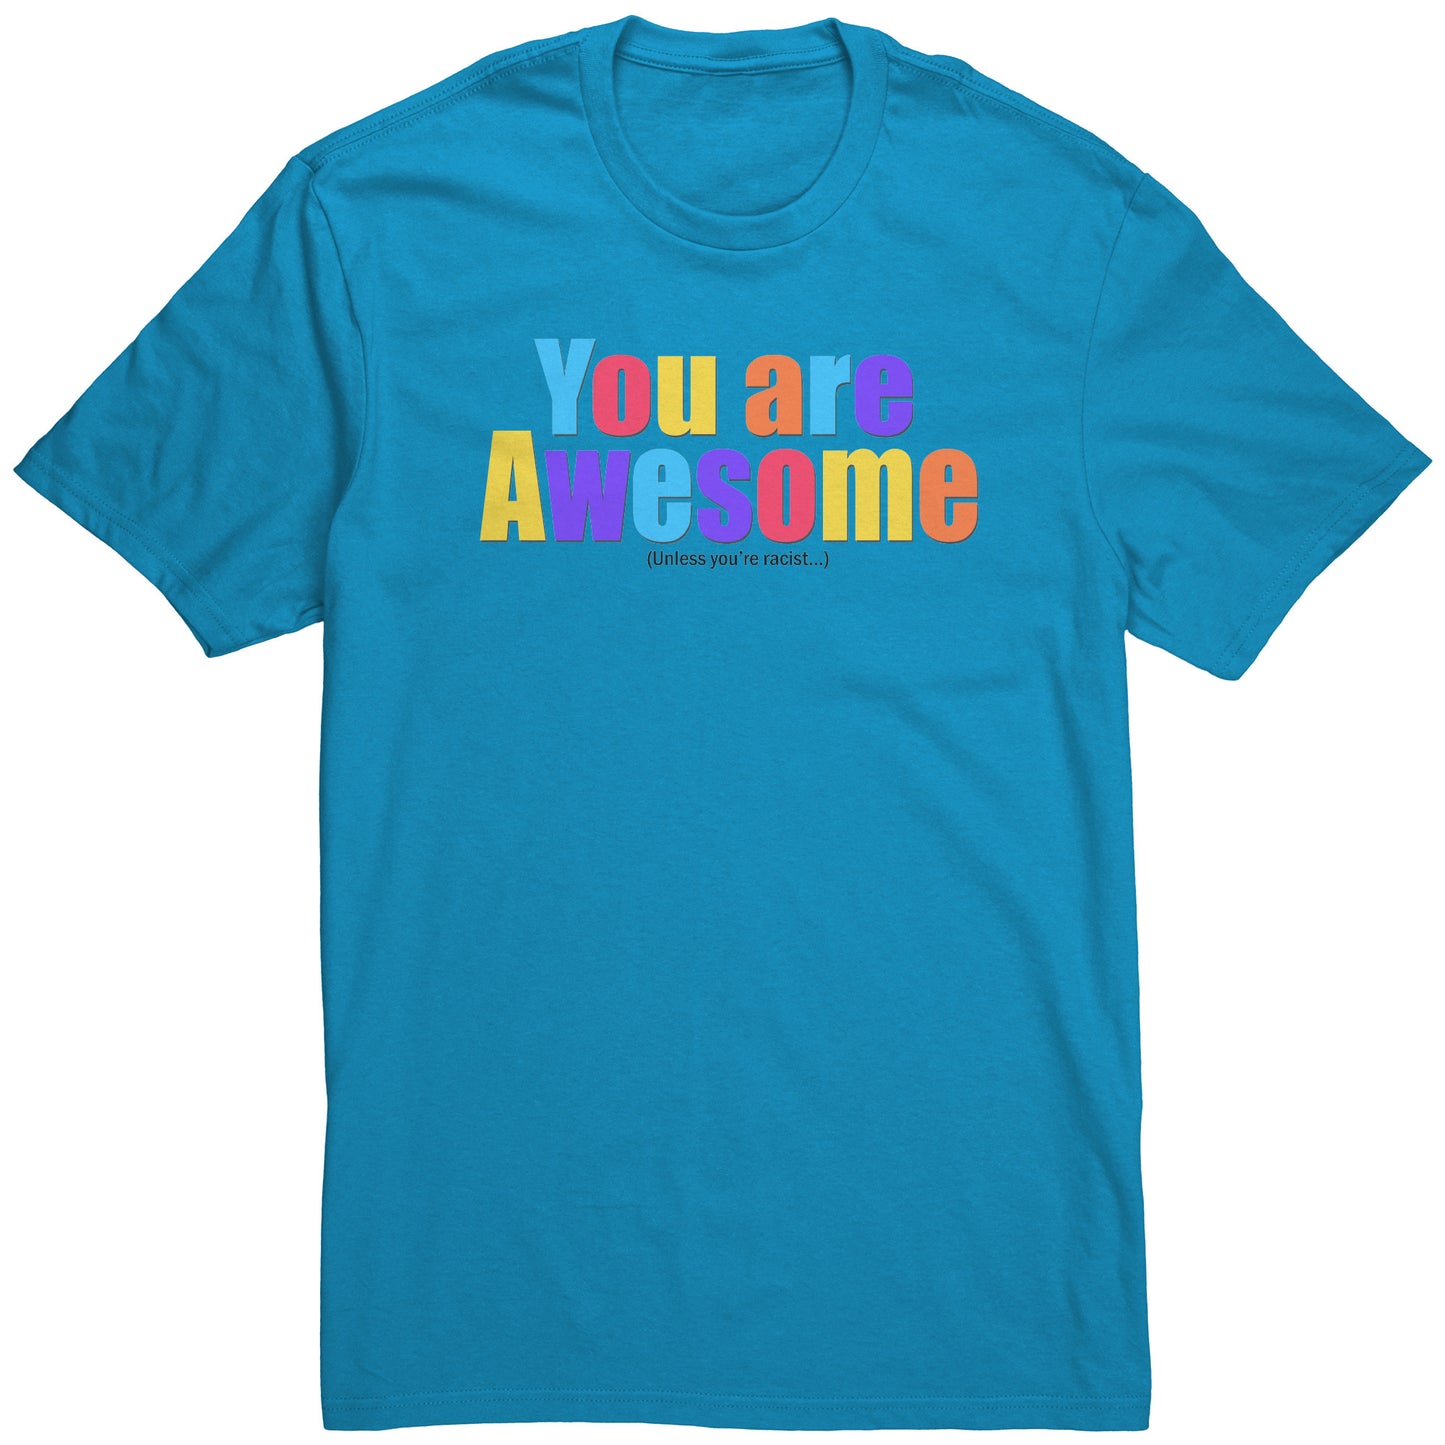 Adult Tee "You Are Awesome Unless" (black print)